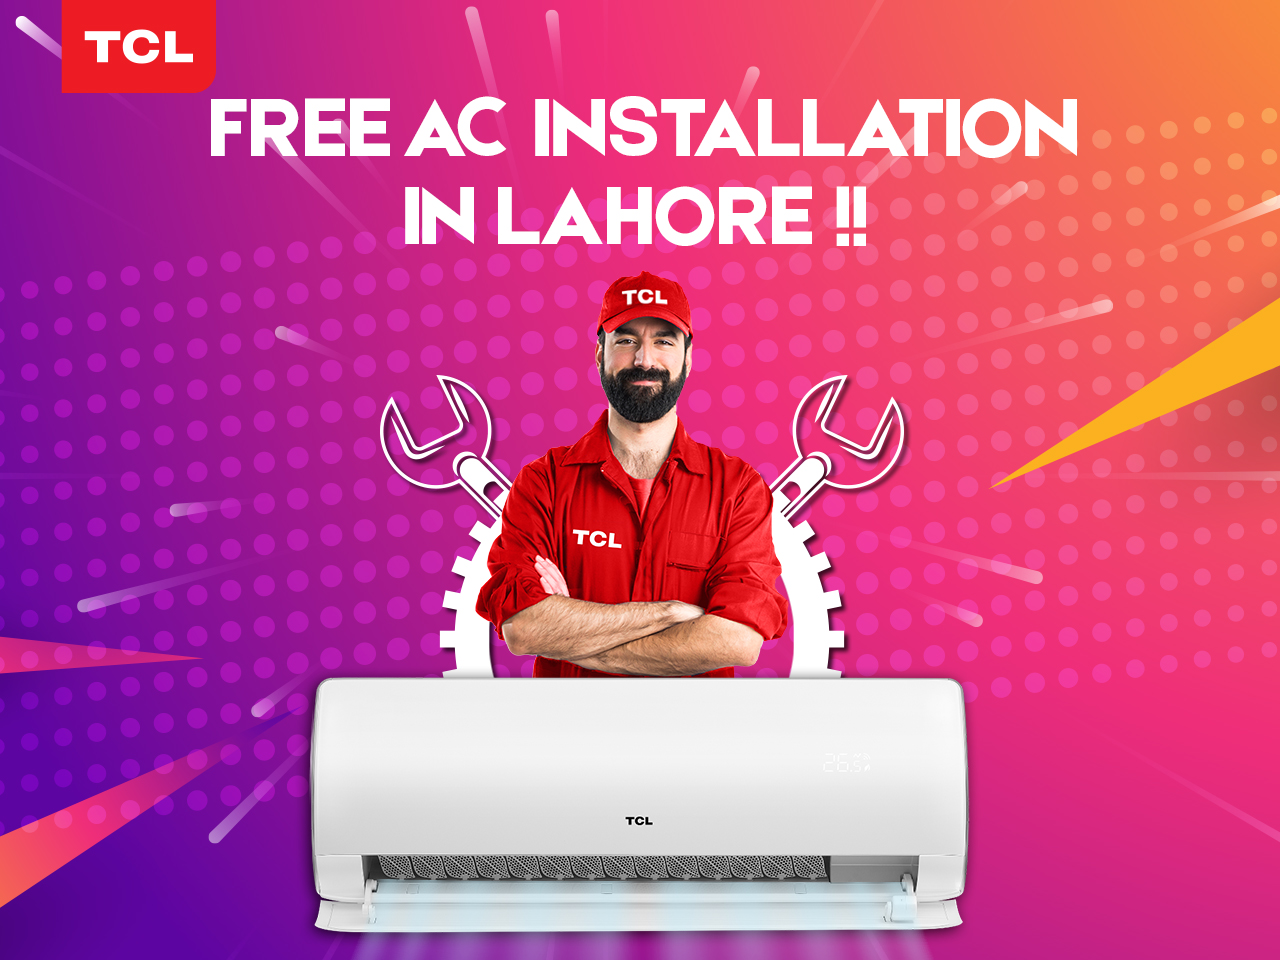 Summers Just Got Cooler in Lahore, TCL Offers Free AC Installation - News